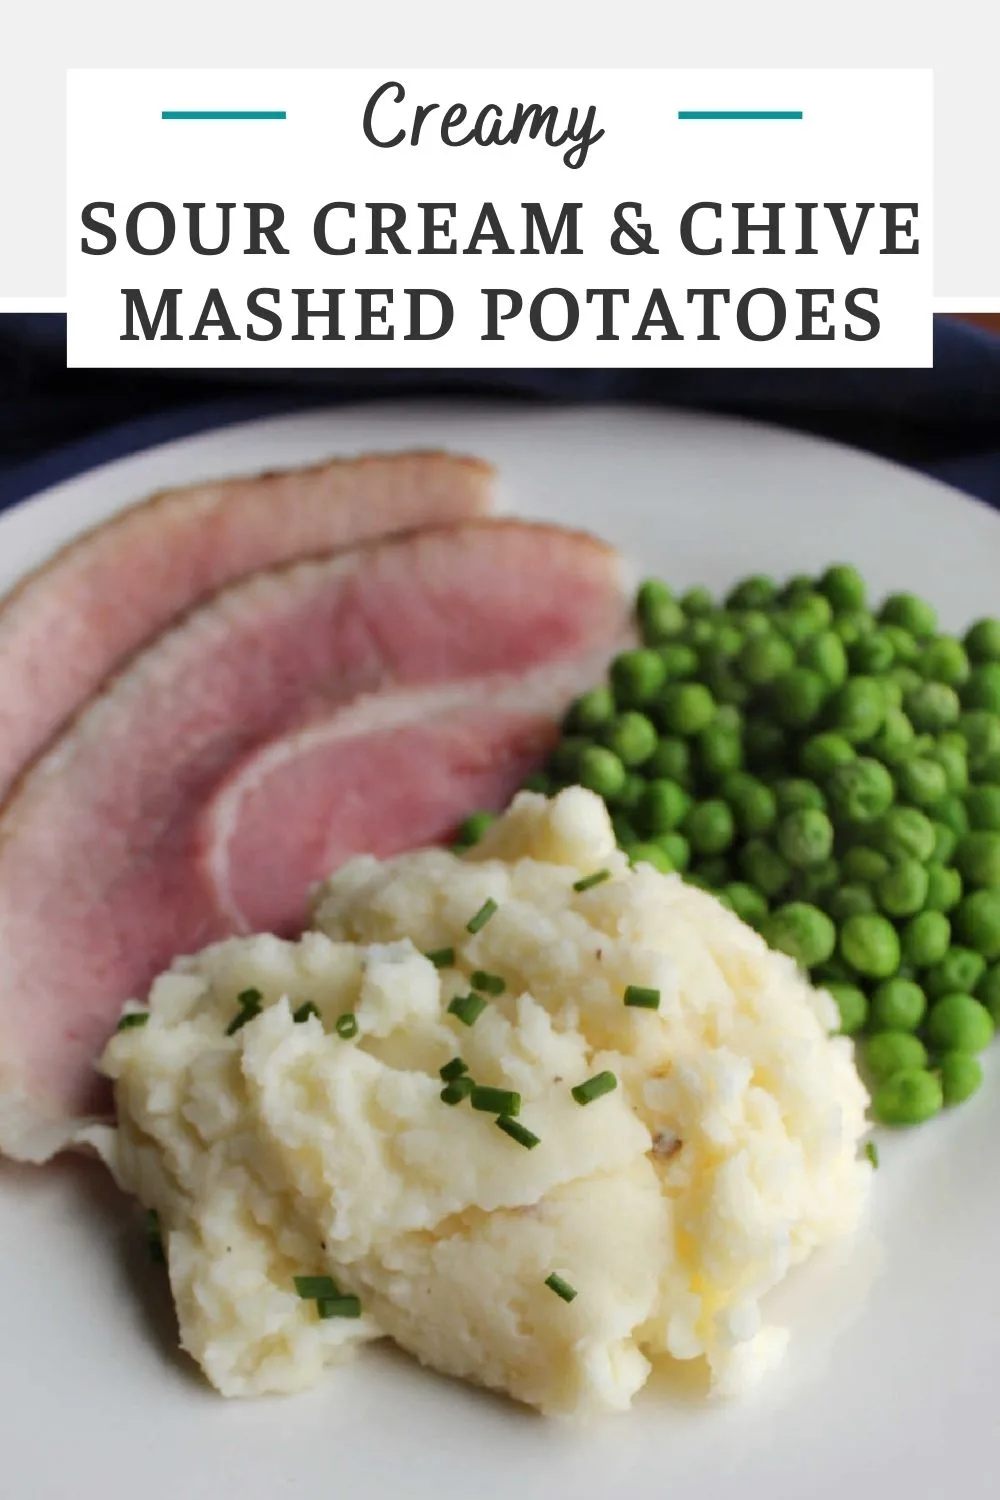 Sour cream and chive mashed potatoes are a perfect side dish. They are so creamy, flavorful and make a great addition to any dinner menu.